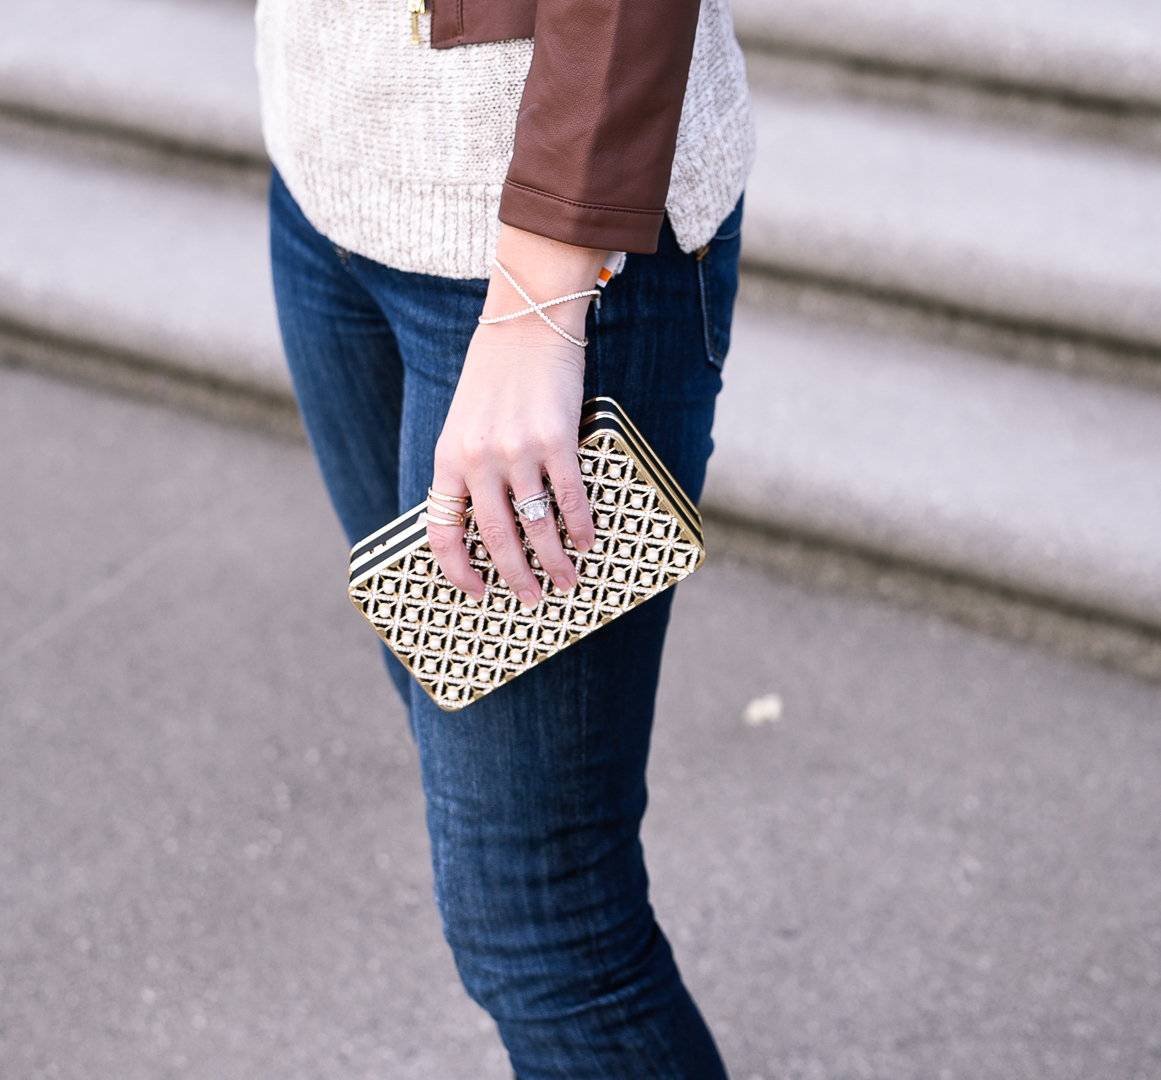 Perfect sparkly clutch for a date night out. 